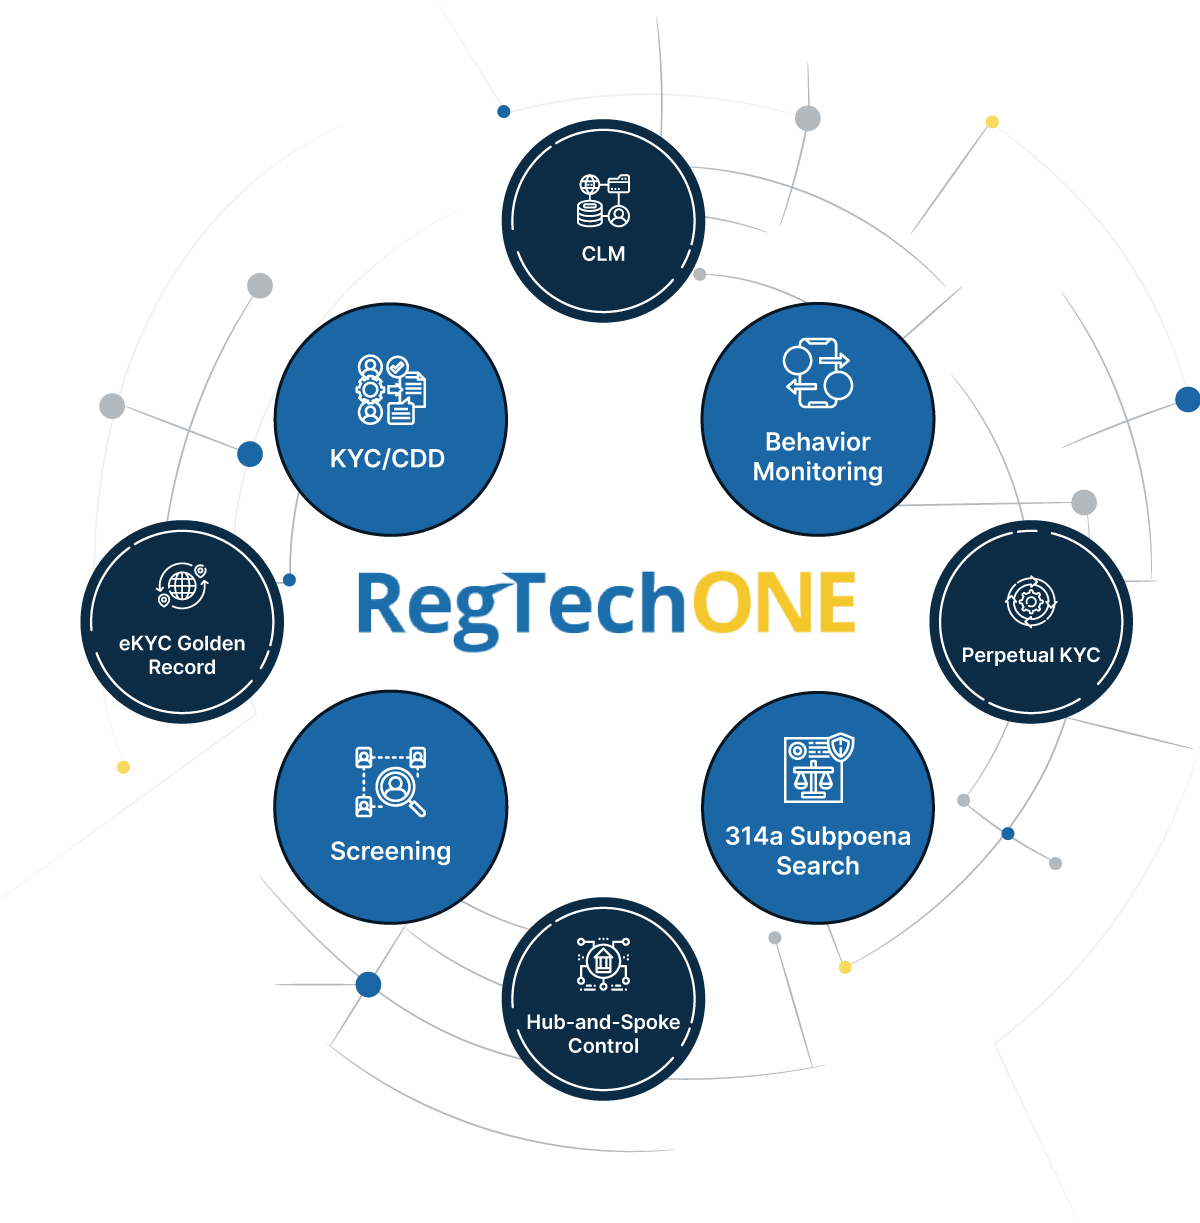 This hero-style illustration shows the networked nature of AML software on the RegTechONE platform. The art shows the AML software modules for KYC CDD, transaction monitoring, sanctions screening, and other uses for this AML software designed by the firm AML Partners.